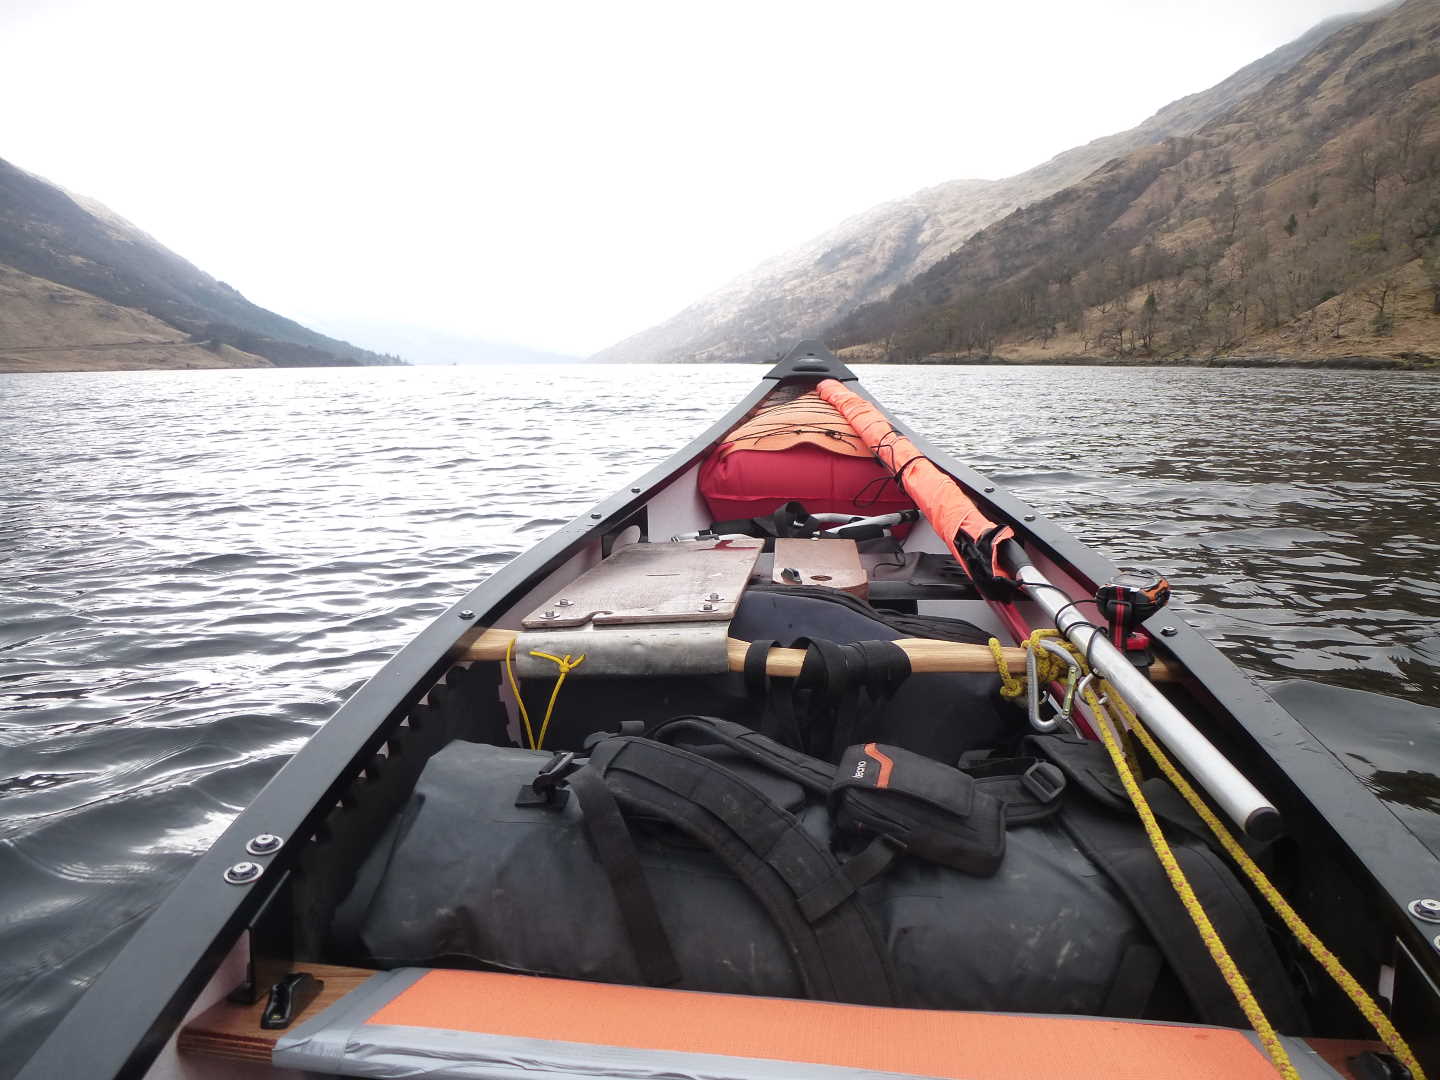 View of a loch from inside a kayak. The front of the kayak filled with equipment can be seen